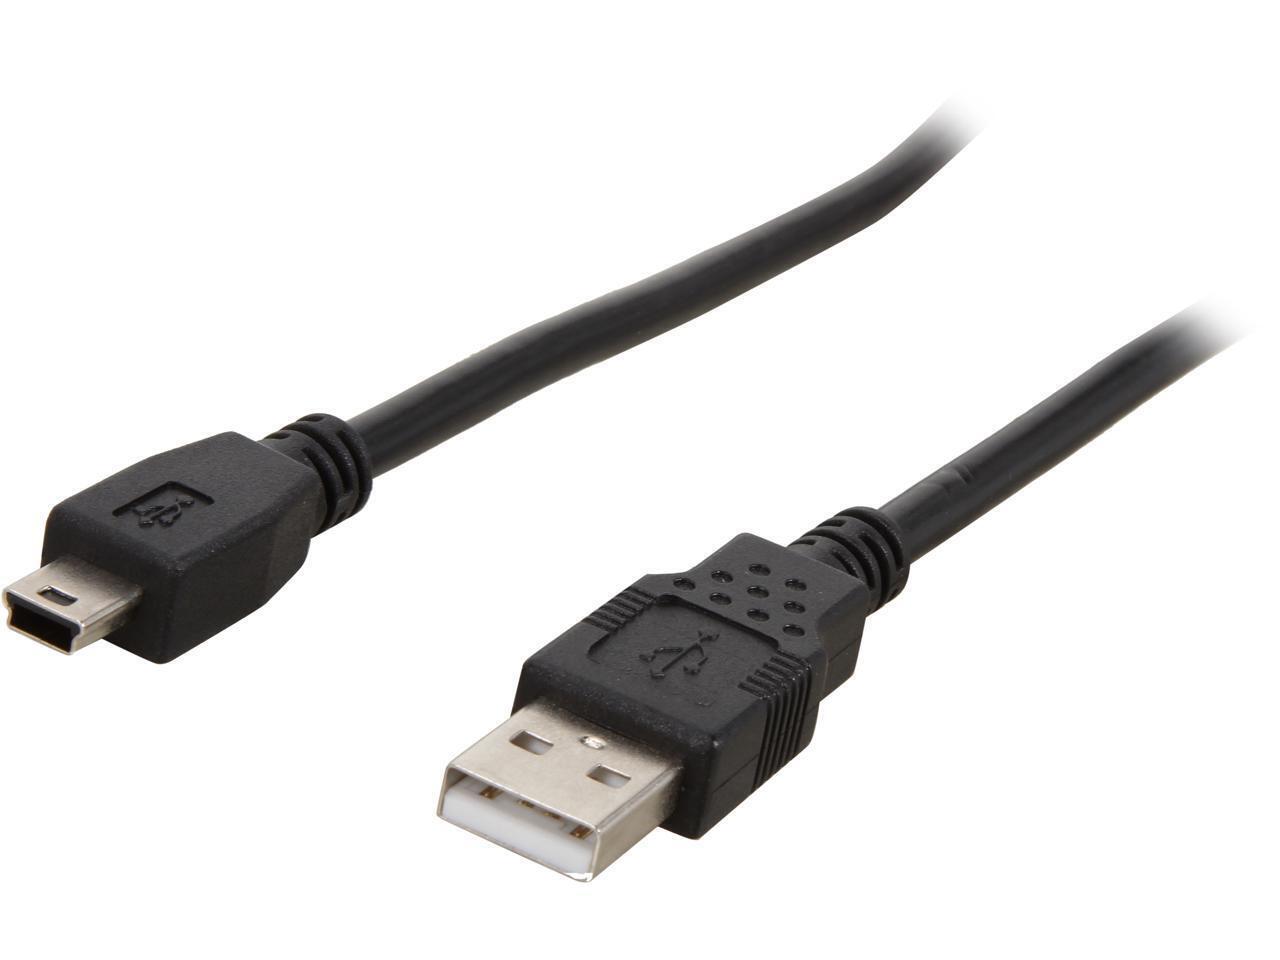 C2G 2m USB 2.0 A to Mini-b Cable, Model 27005